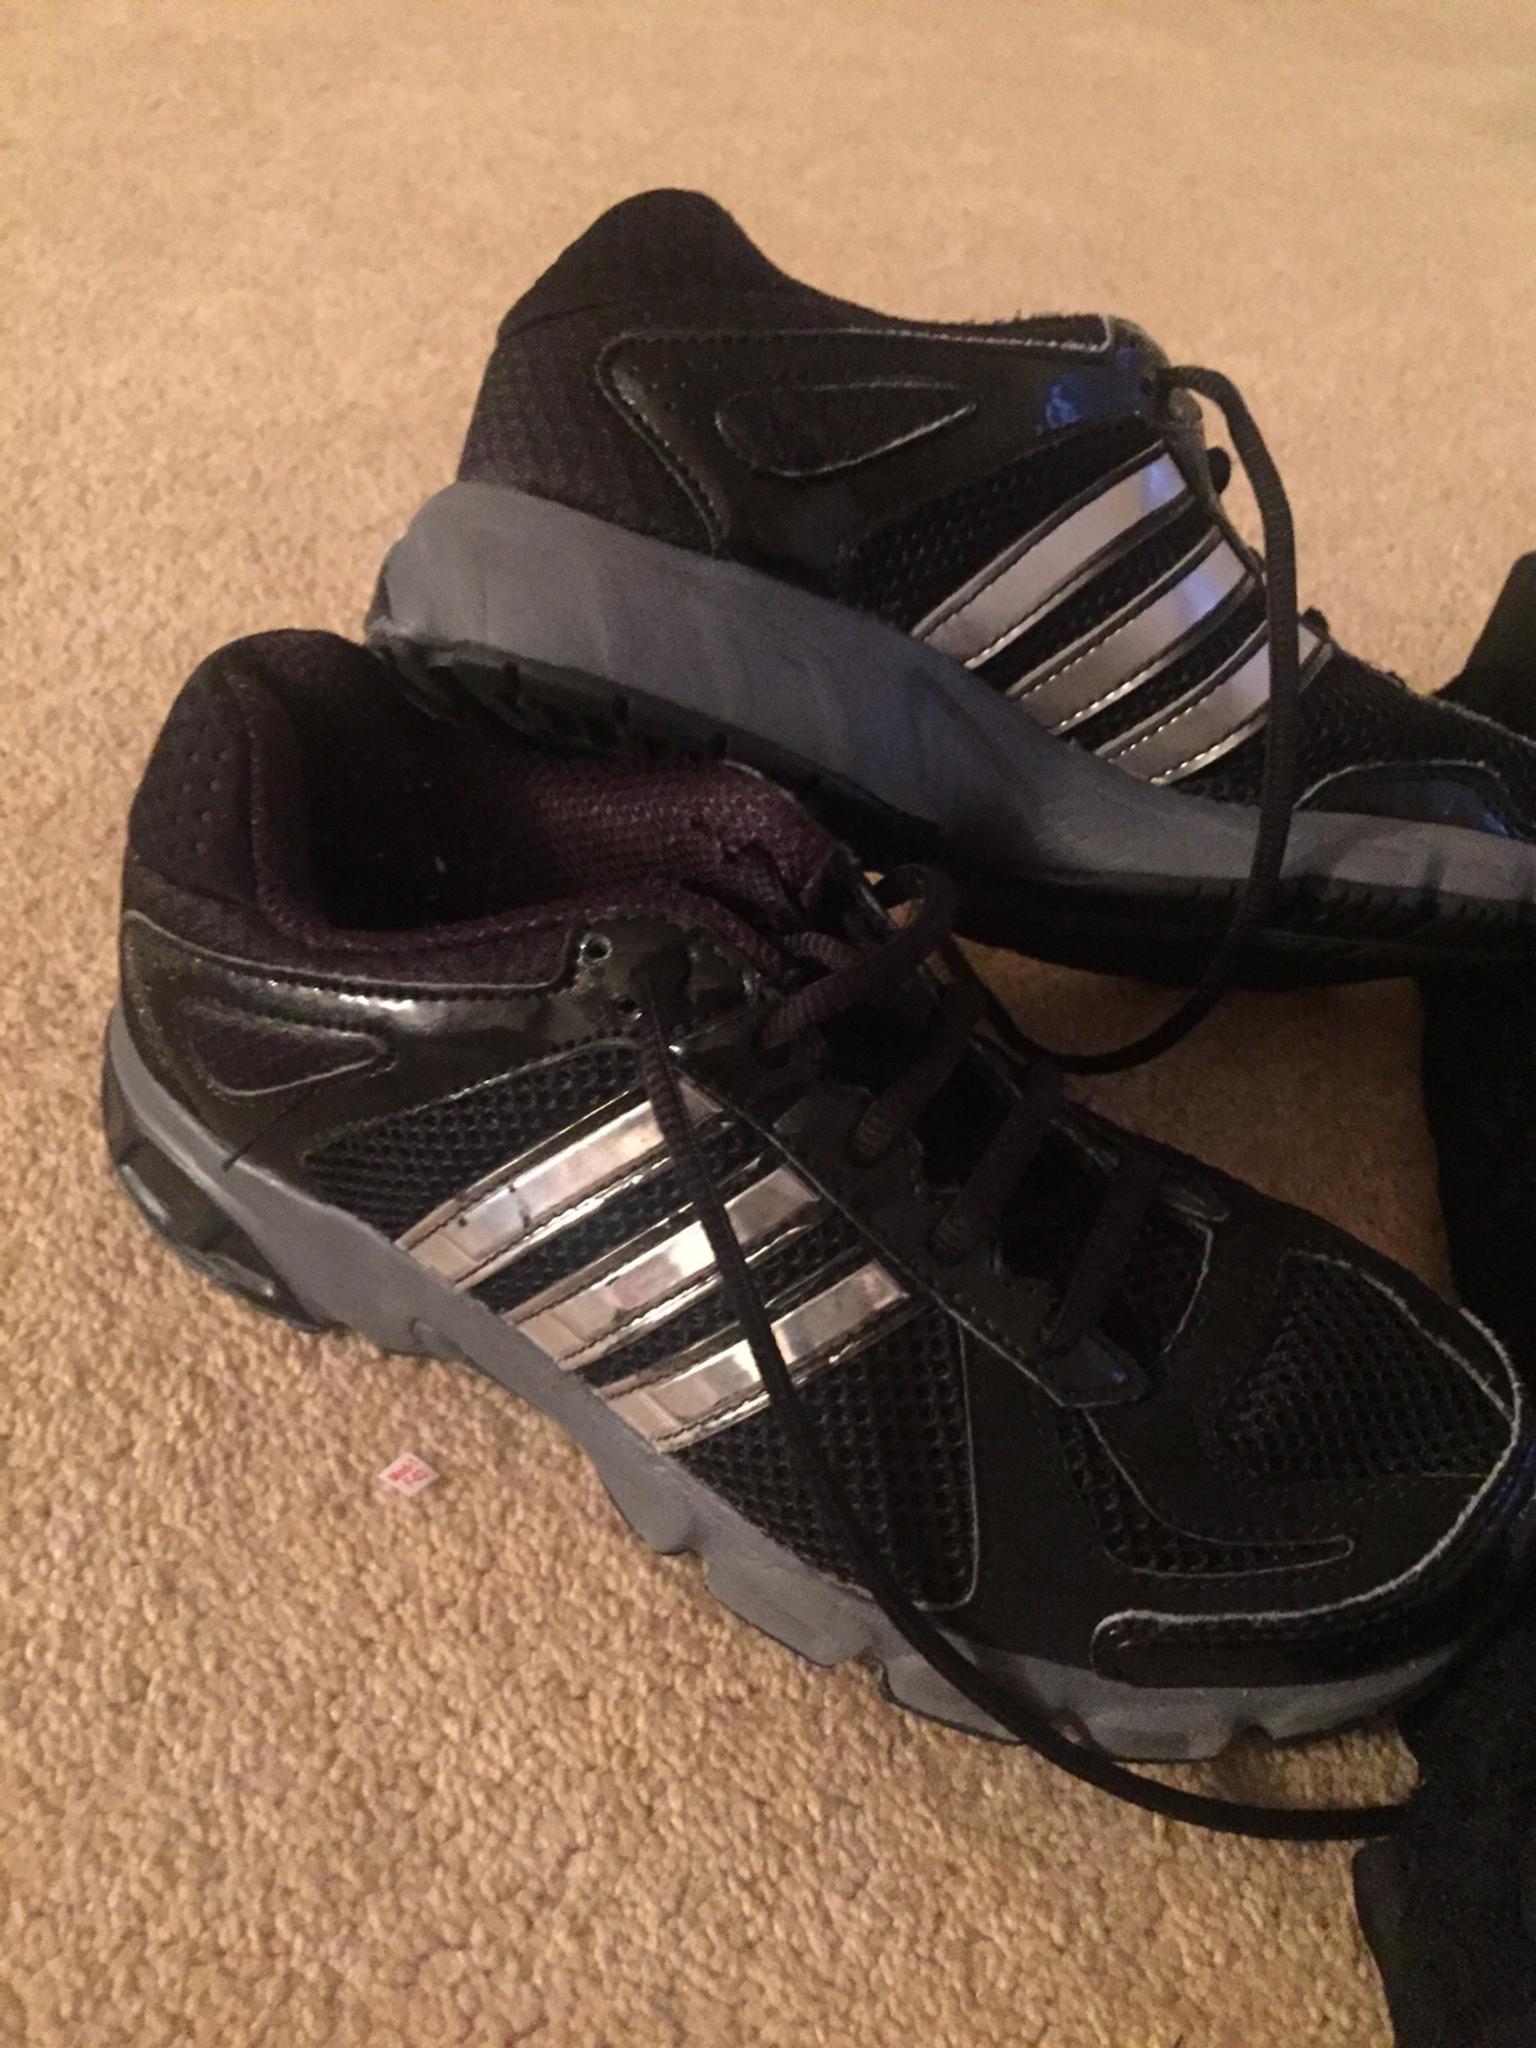 adidas black trainers size 3